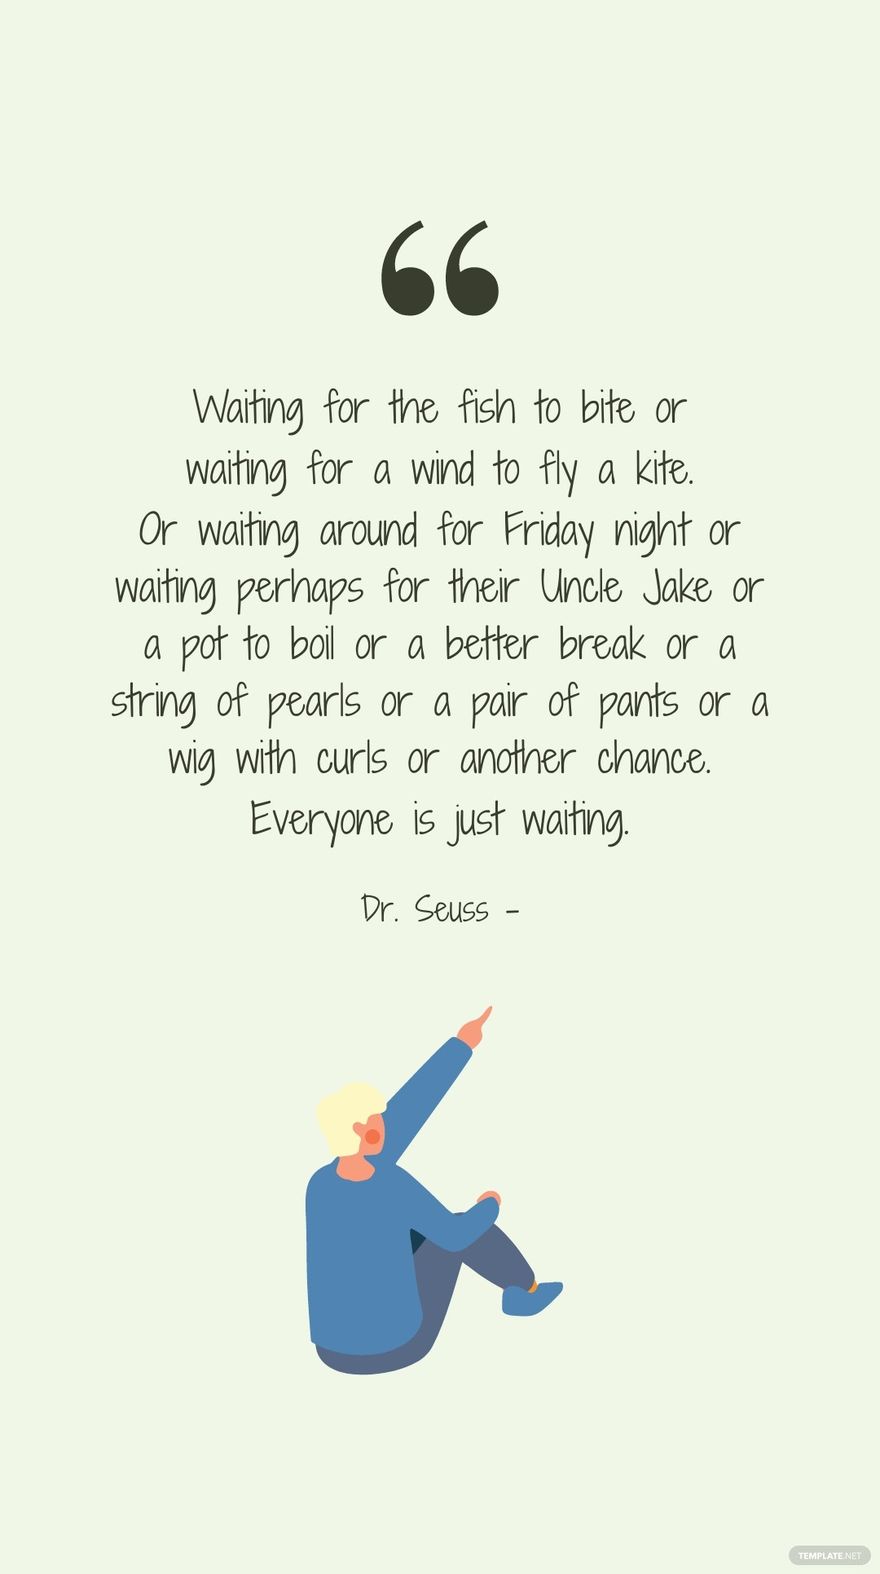 Free Dr. Seuss - Waiting for the fish to bite or waiting for a wind to fly a kite. Or waiting around for Friday night or waiting perhaps for their Uncle Jake or a pot to boil or a better break or a string  in JPG